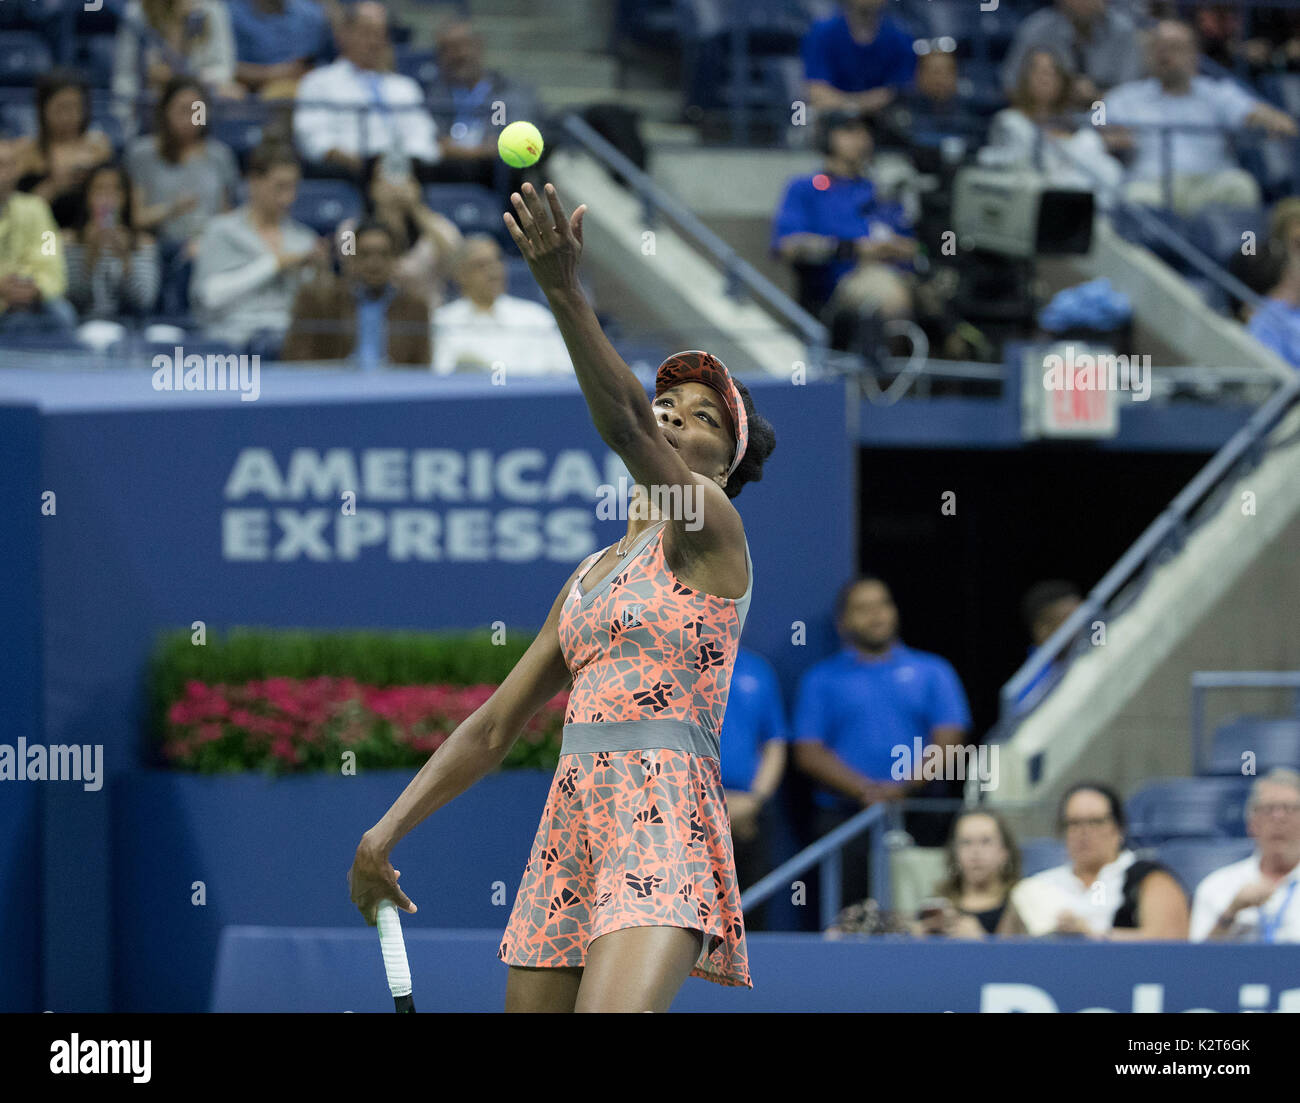 New York, United States. 30th Aug, 2017. Venus Williams of USA returns ball during match against Oceane Dodin of France at US Open Championships at Billie Jean King National Tennis Center Credit: Lev Radin/Pacific Press/Alamy Live News Stock Photo